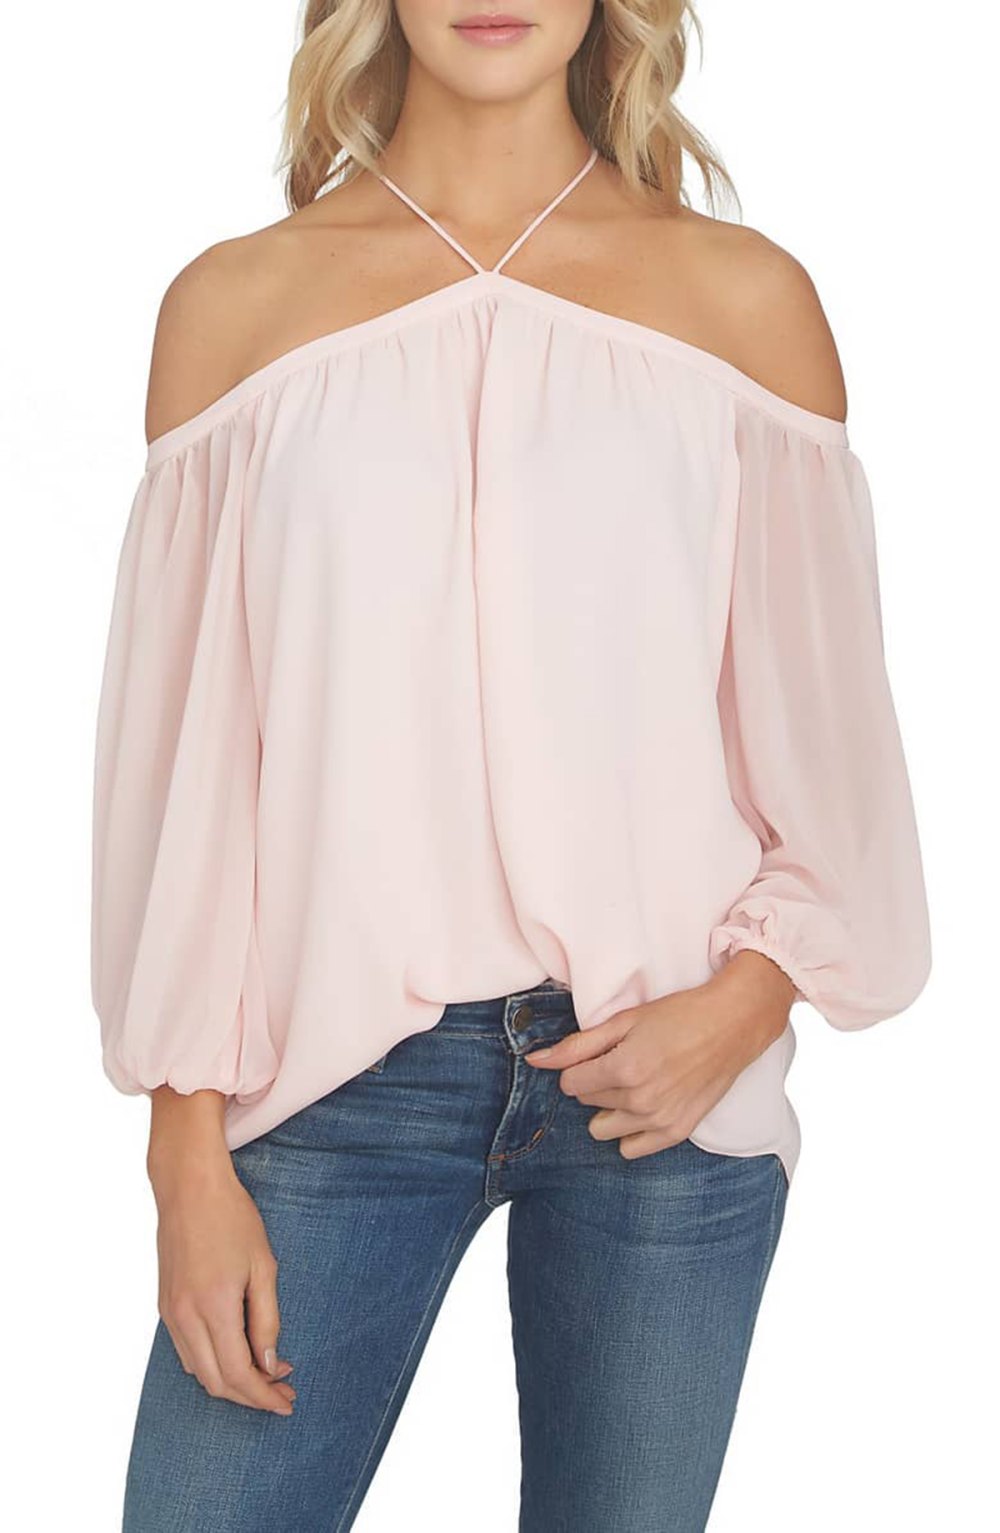 Dress Like a French Girl With These Fan-Favorite Blouses | Us Weekly